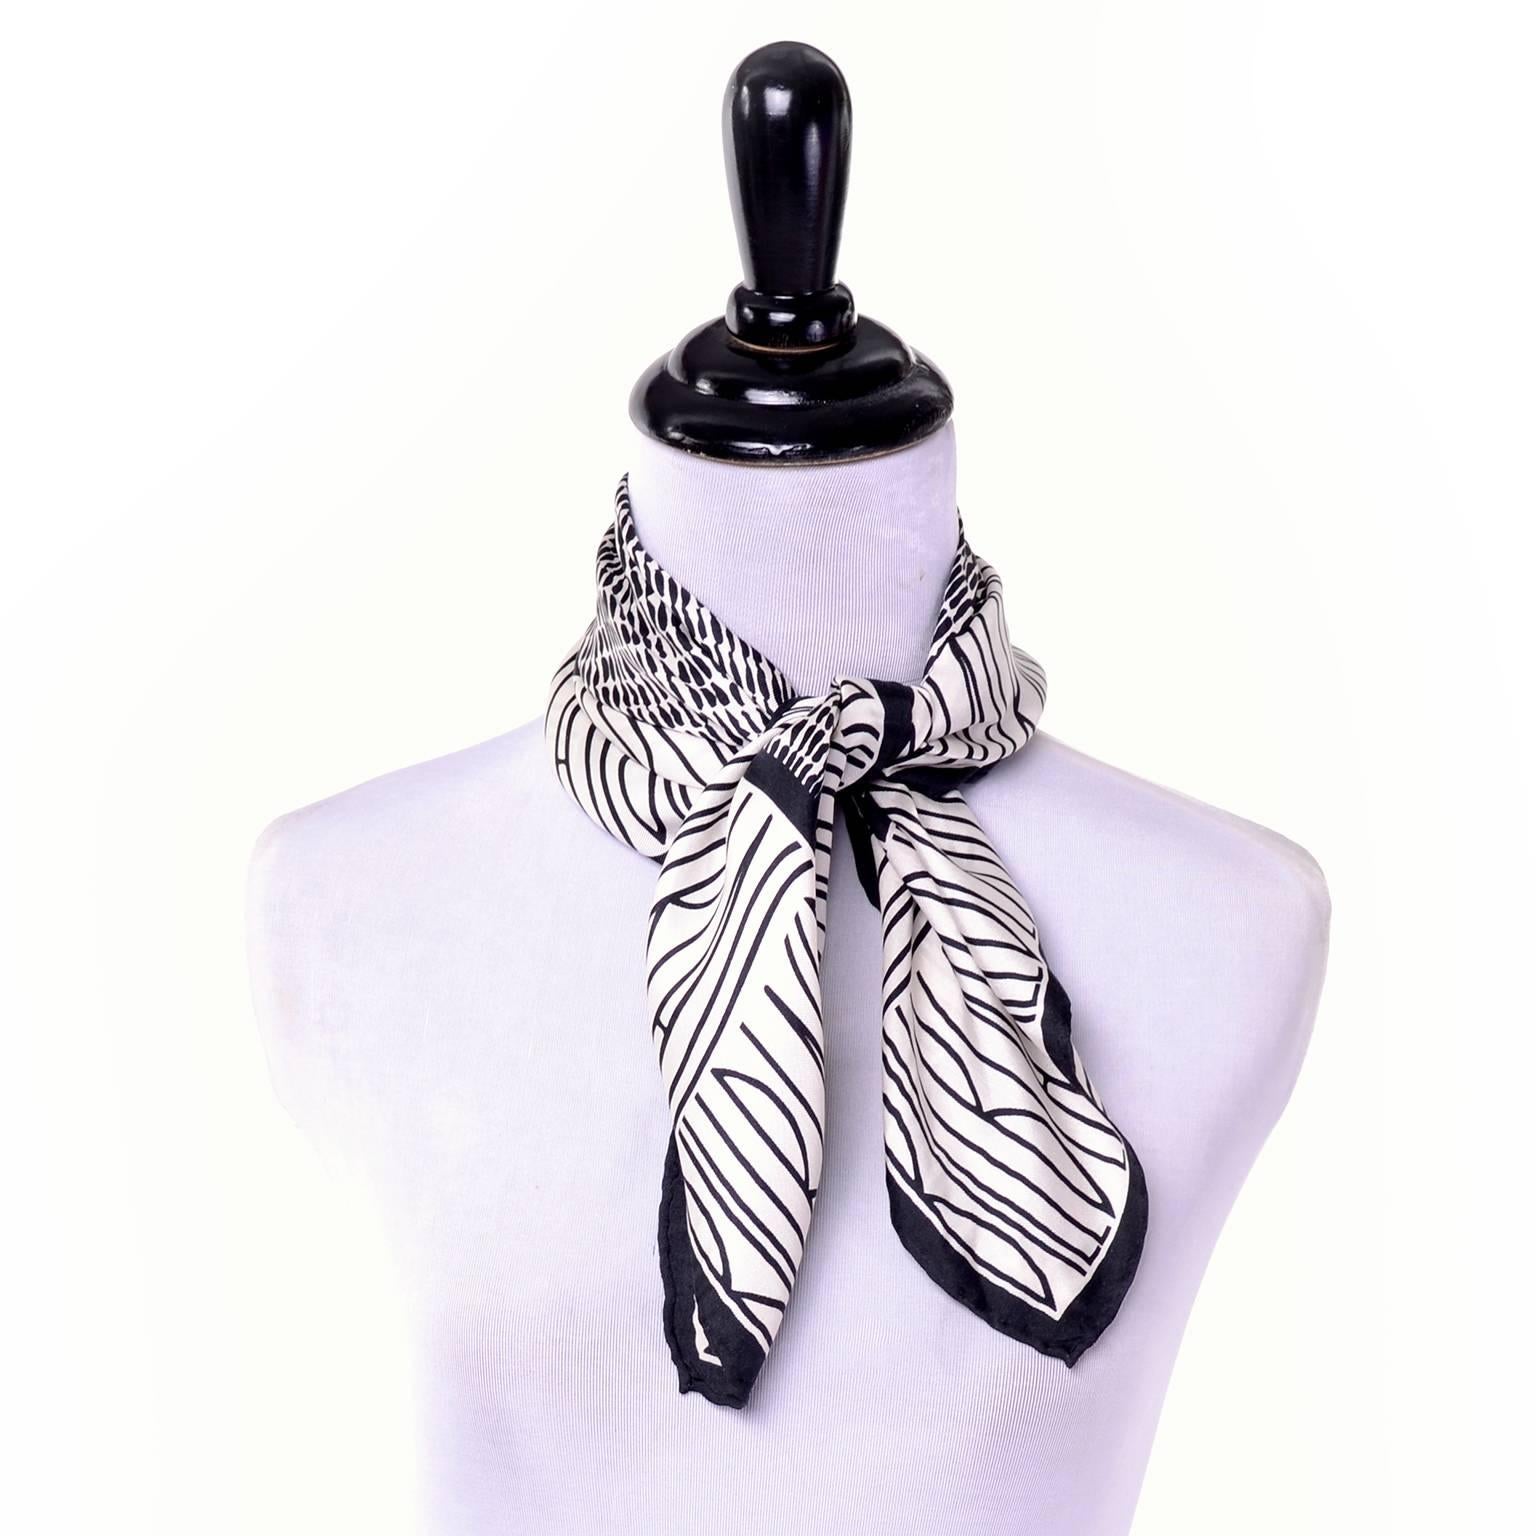 This 1980s square silk scarf by Bill Blass is black and white with his logo name in thick, uppercase letters repeated in a thick band along the edges. The center square has rows of abstract calligraphic dashes. This scarf has a hand rolled edge and